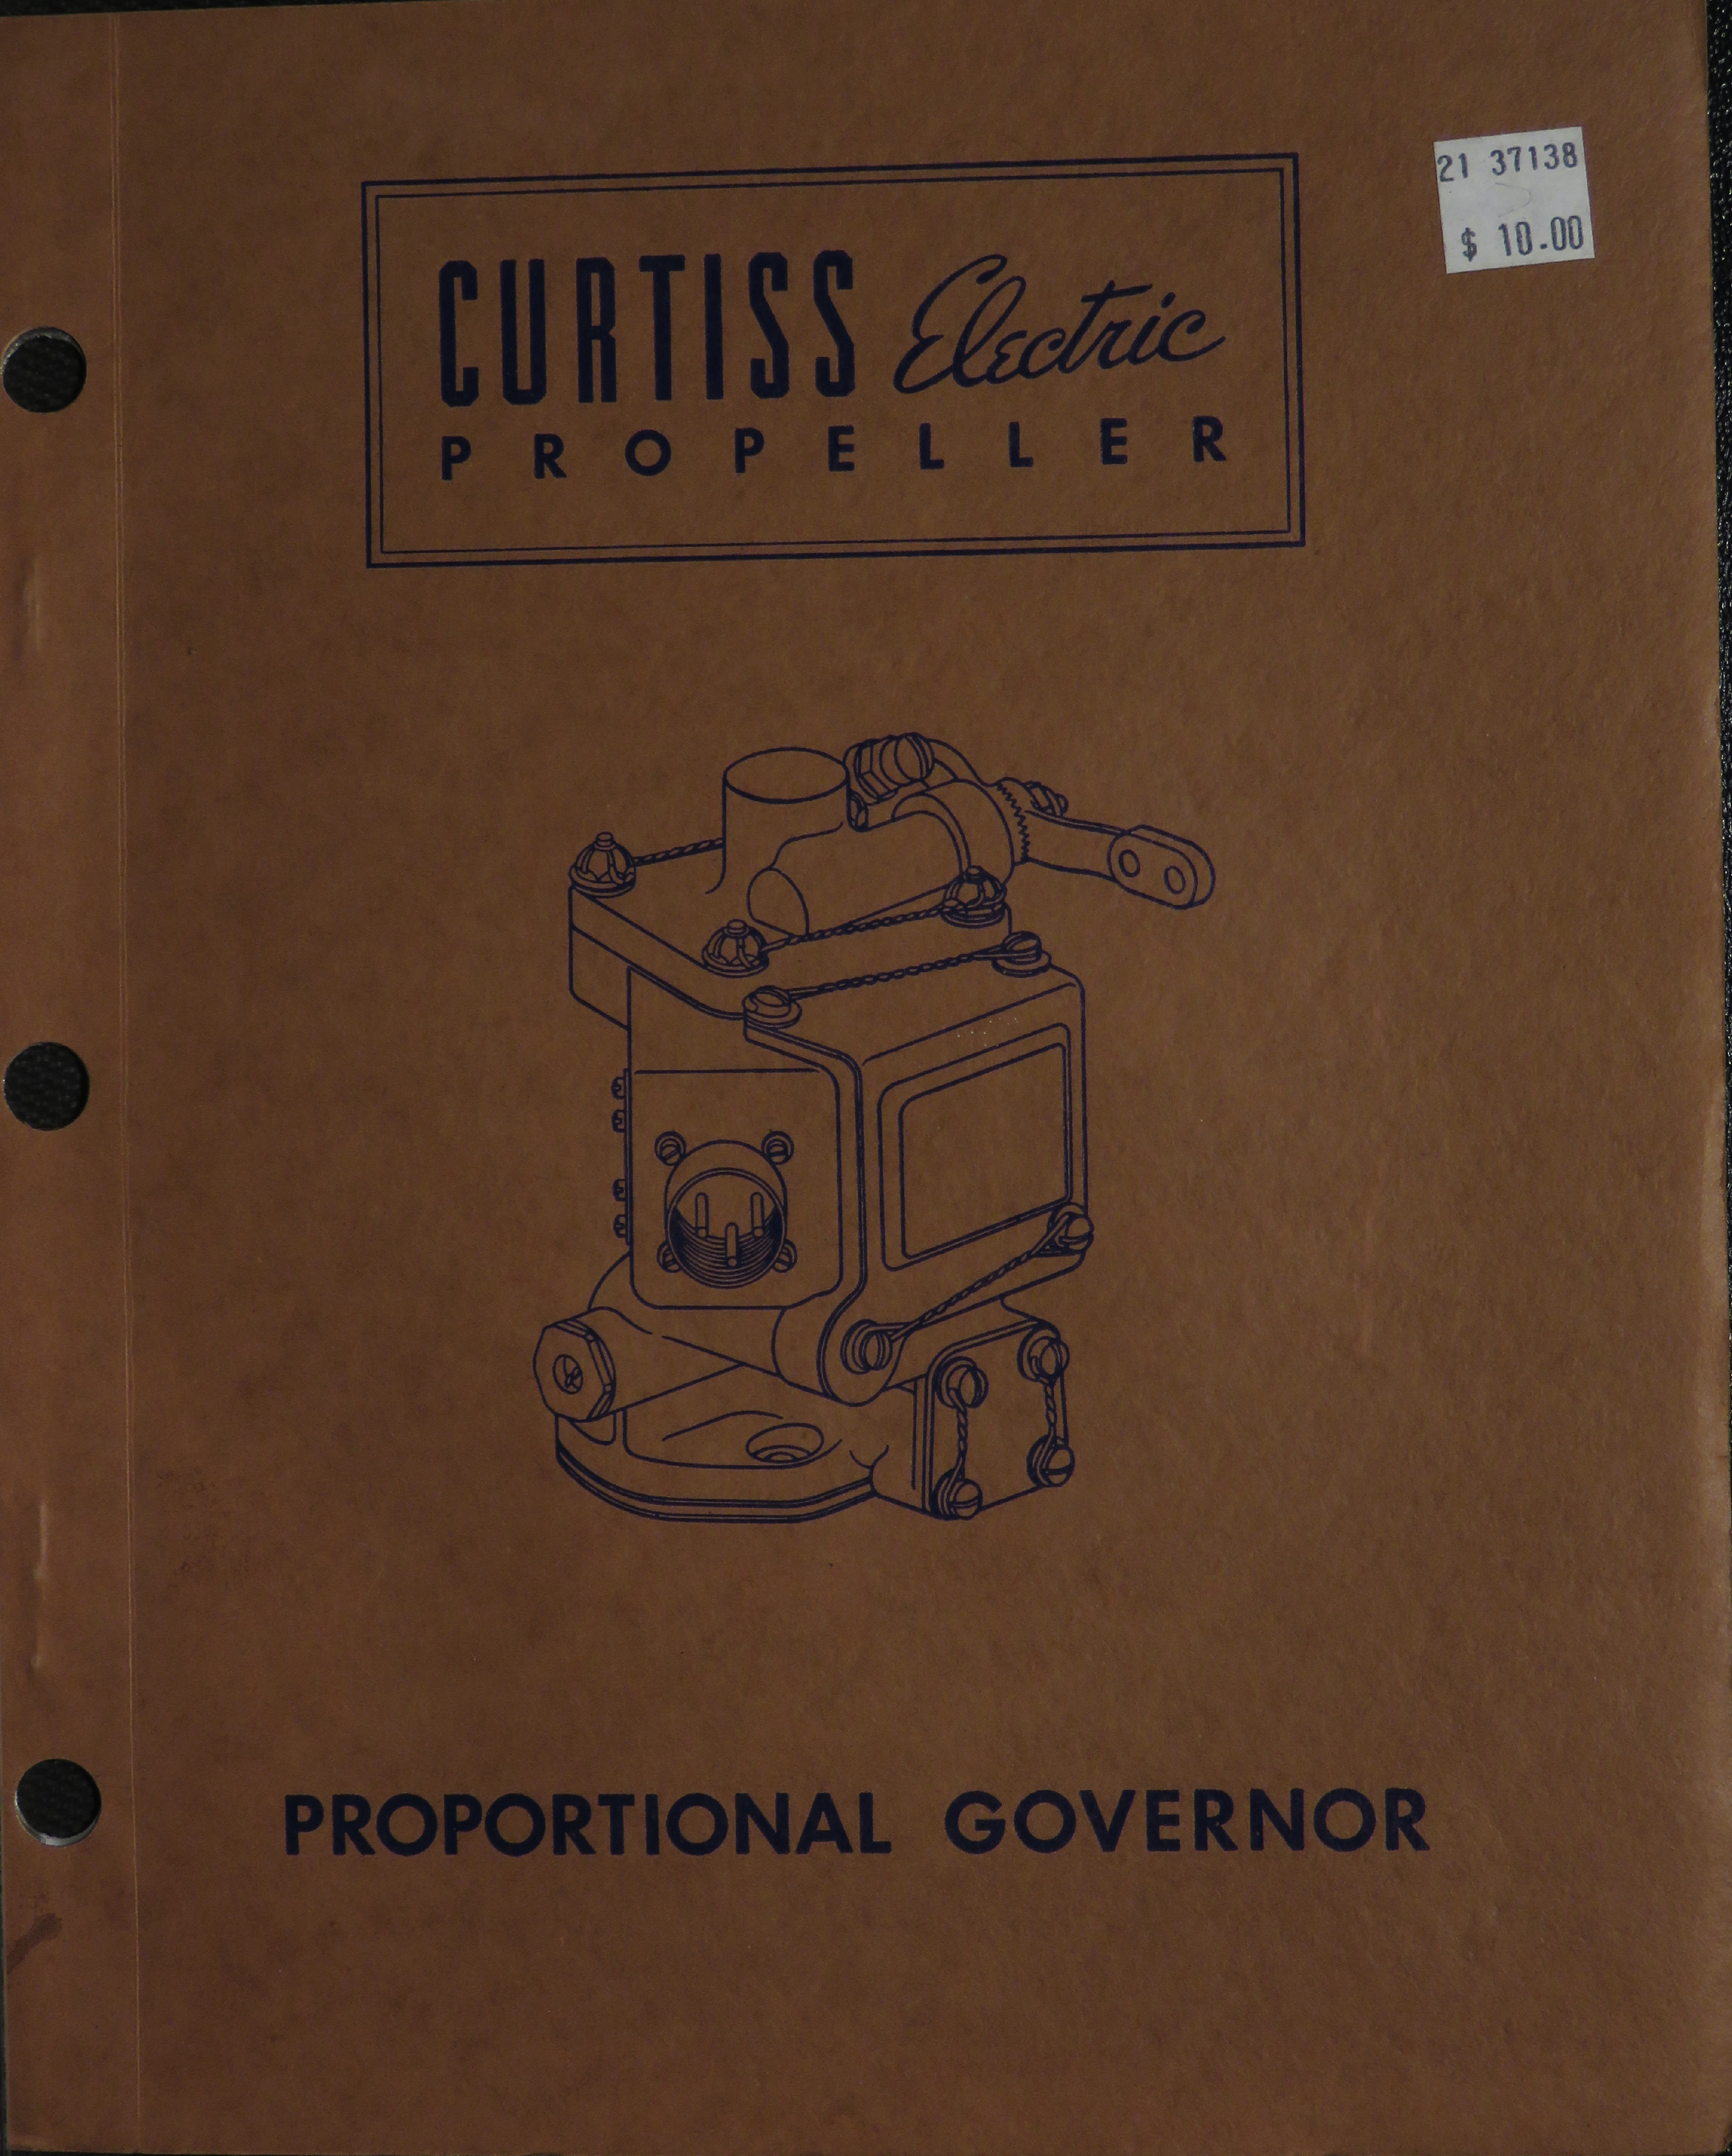 Sample page 1 from AirCorps Library document: Curtiss Electric Propeller - Proportional Governor